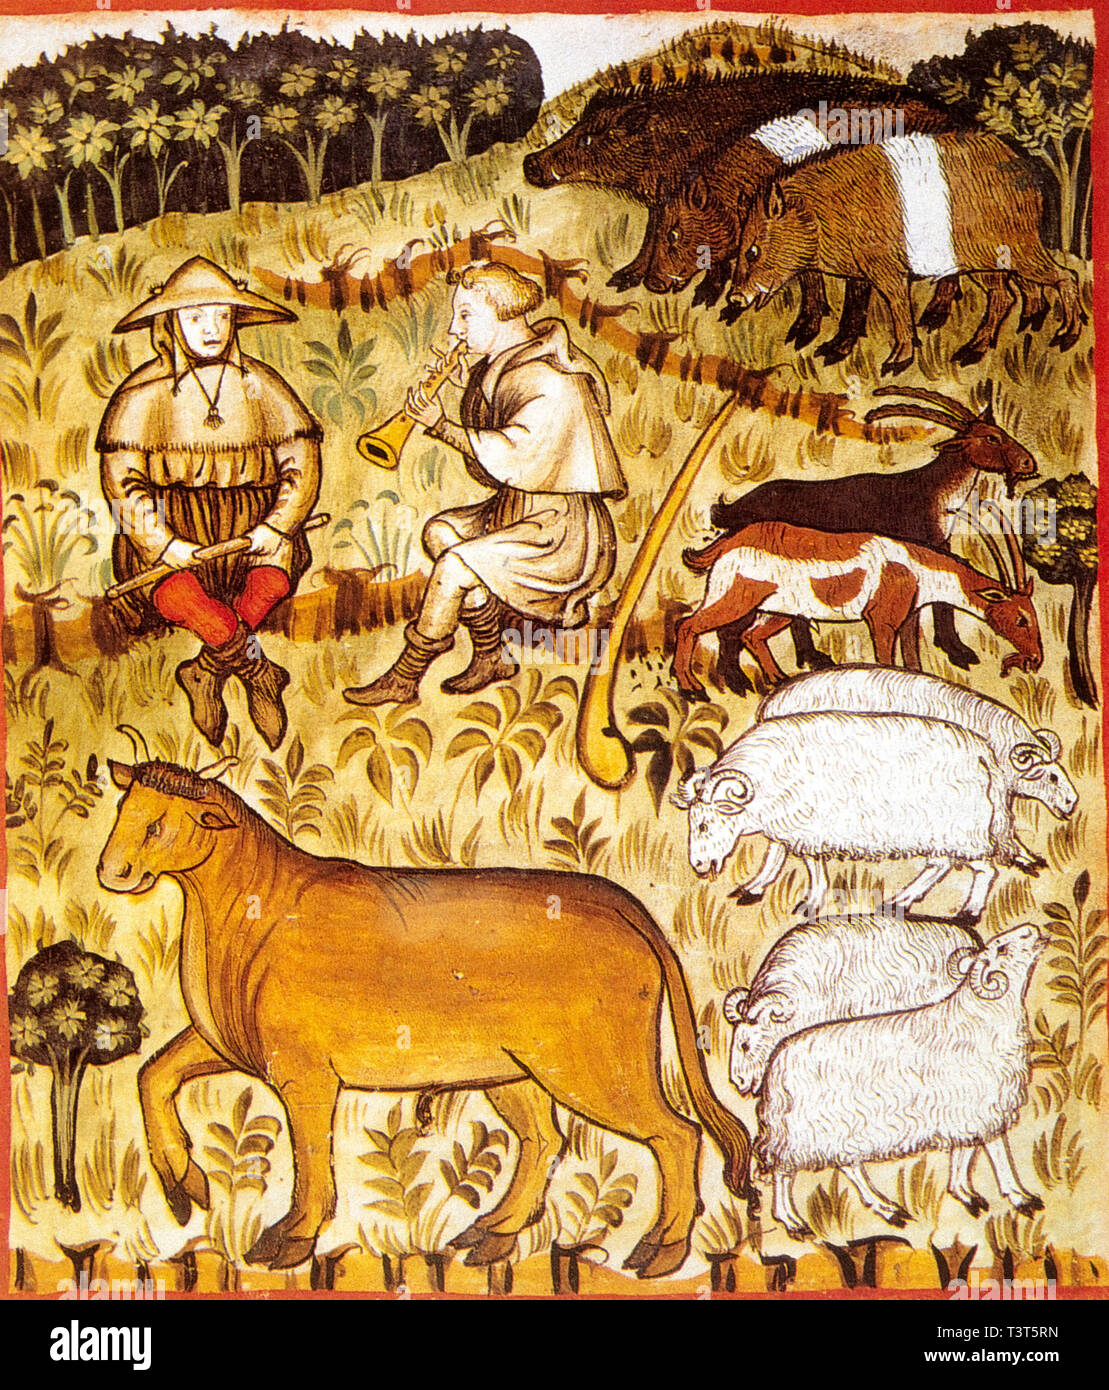 animals and shepherds in the Middle Ages Stock Photo